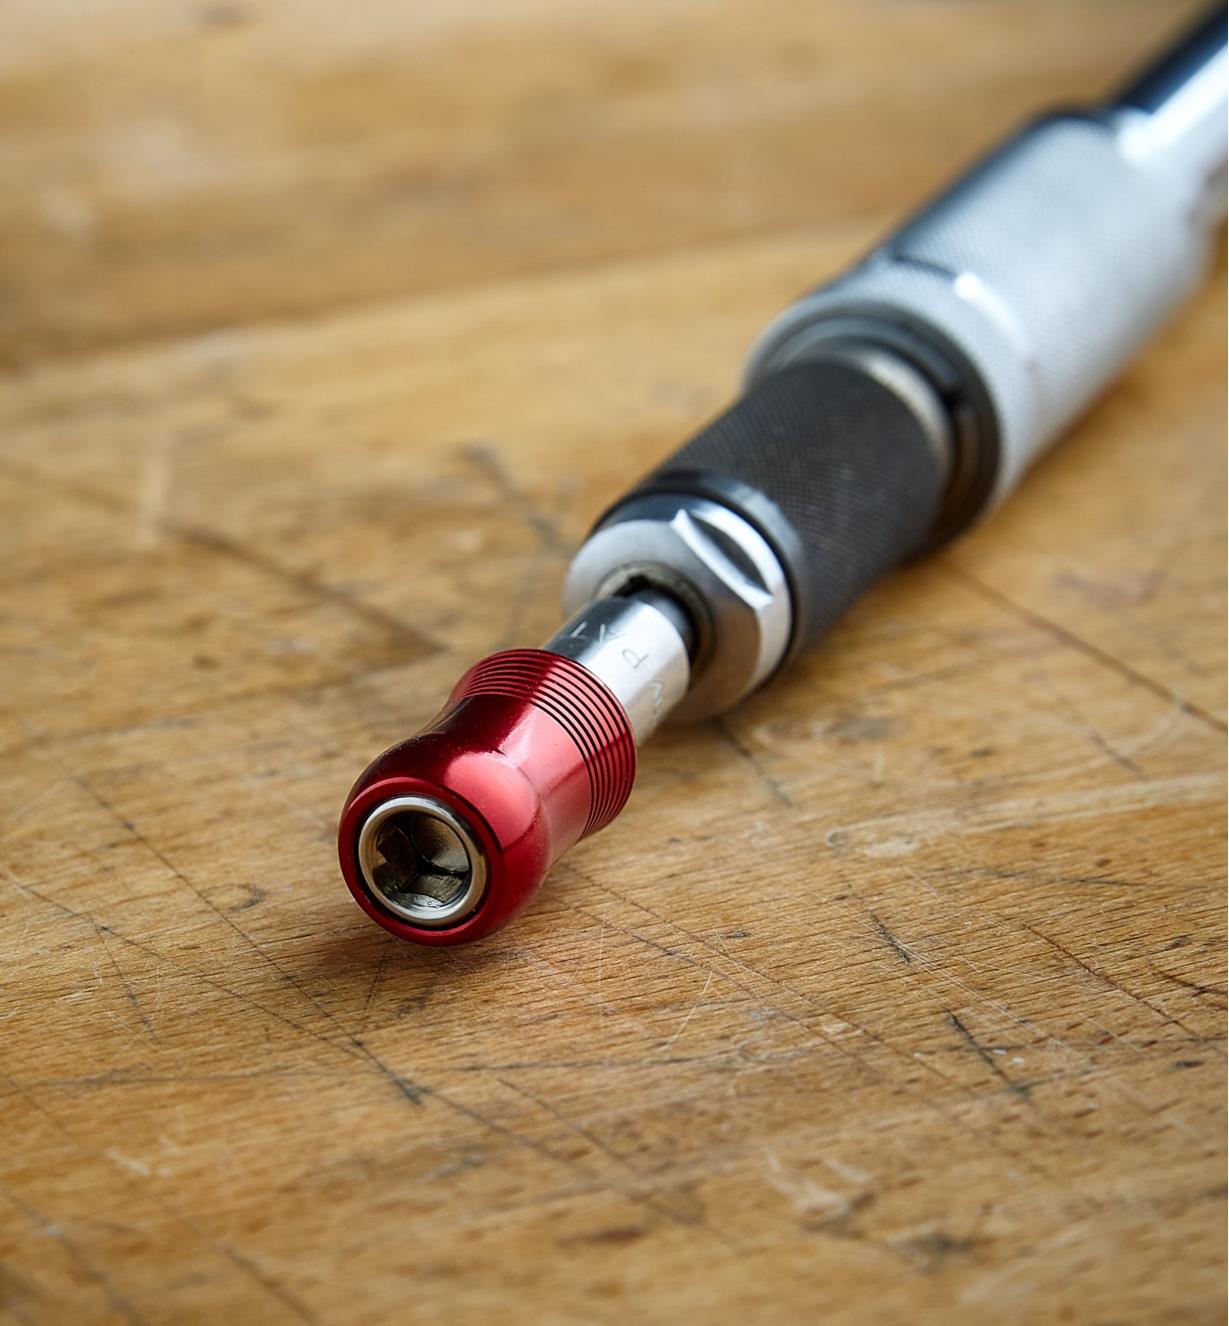 A hex adapter attached to the end of a Yankee-style screwdriver